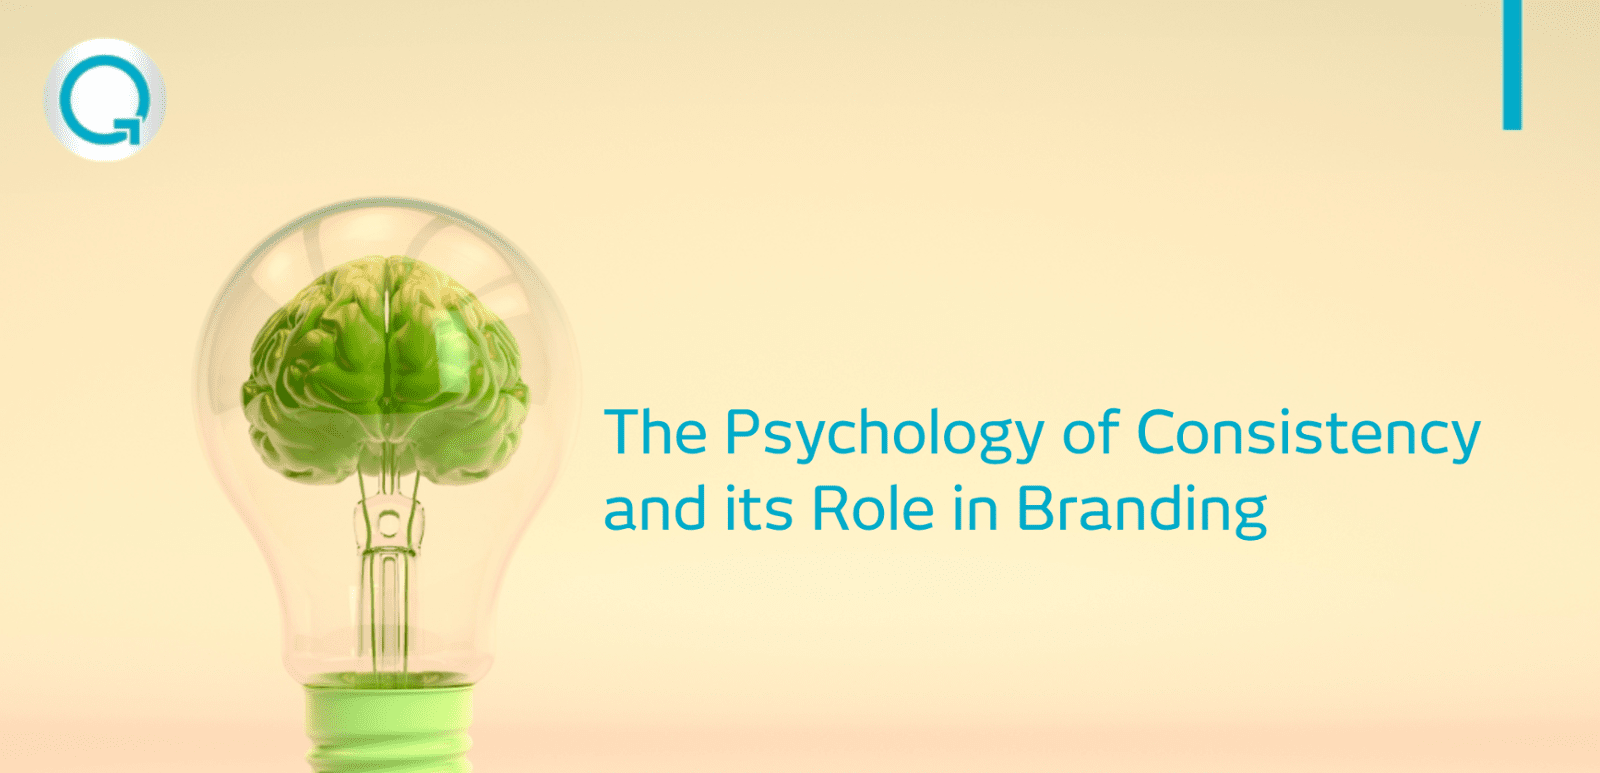 The psychology of consistency and its role in branding